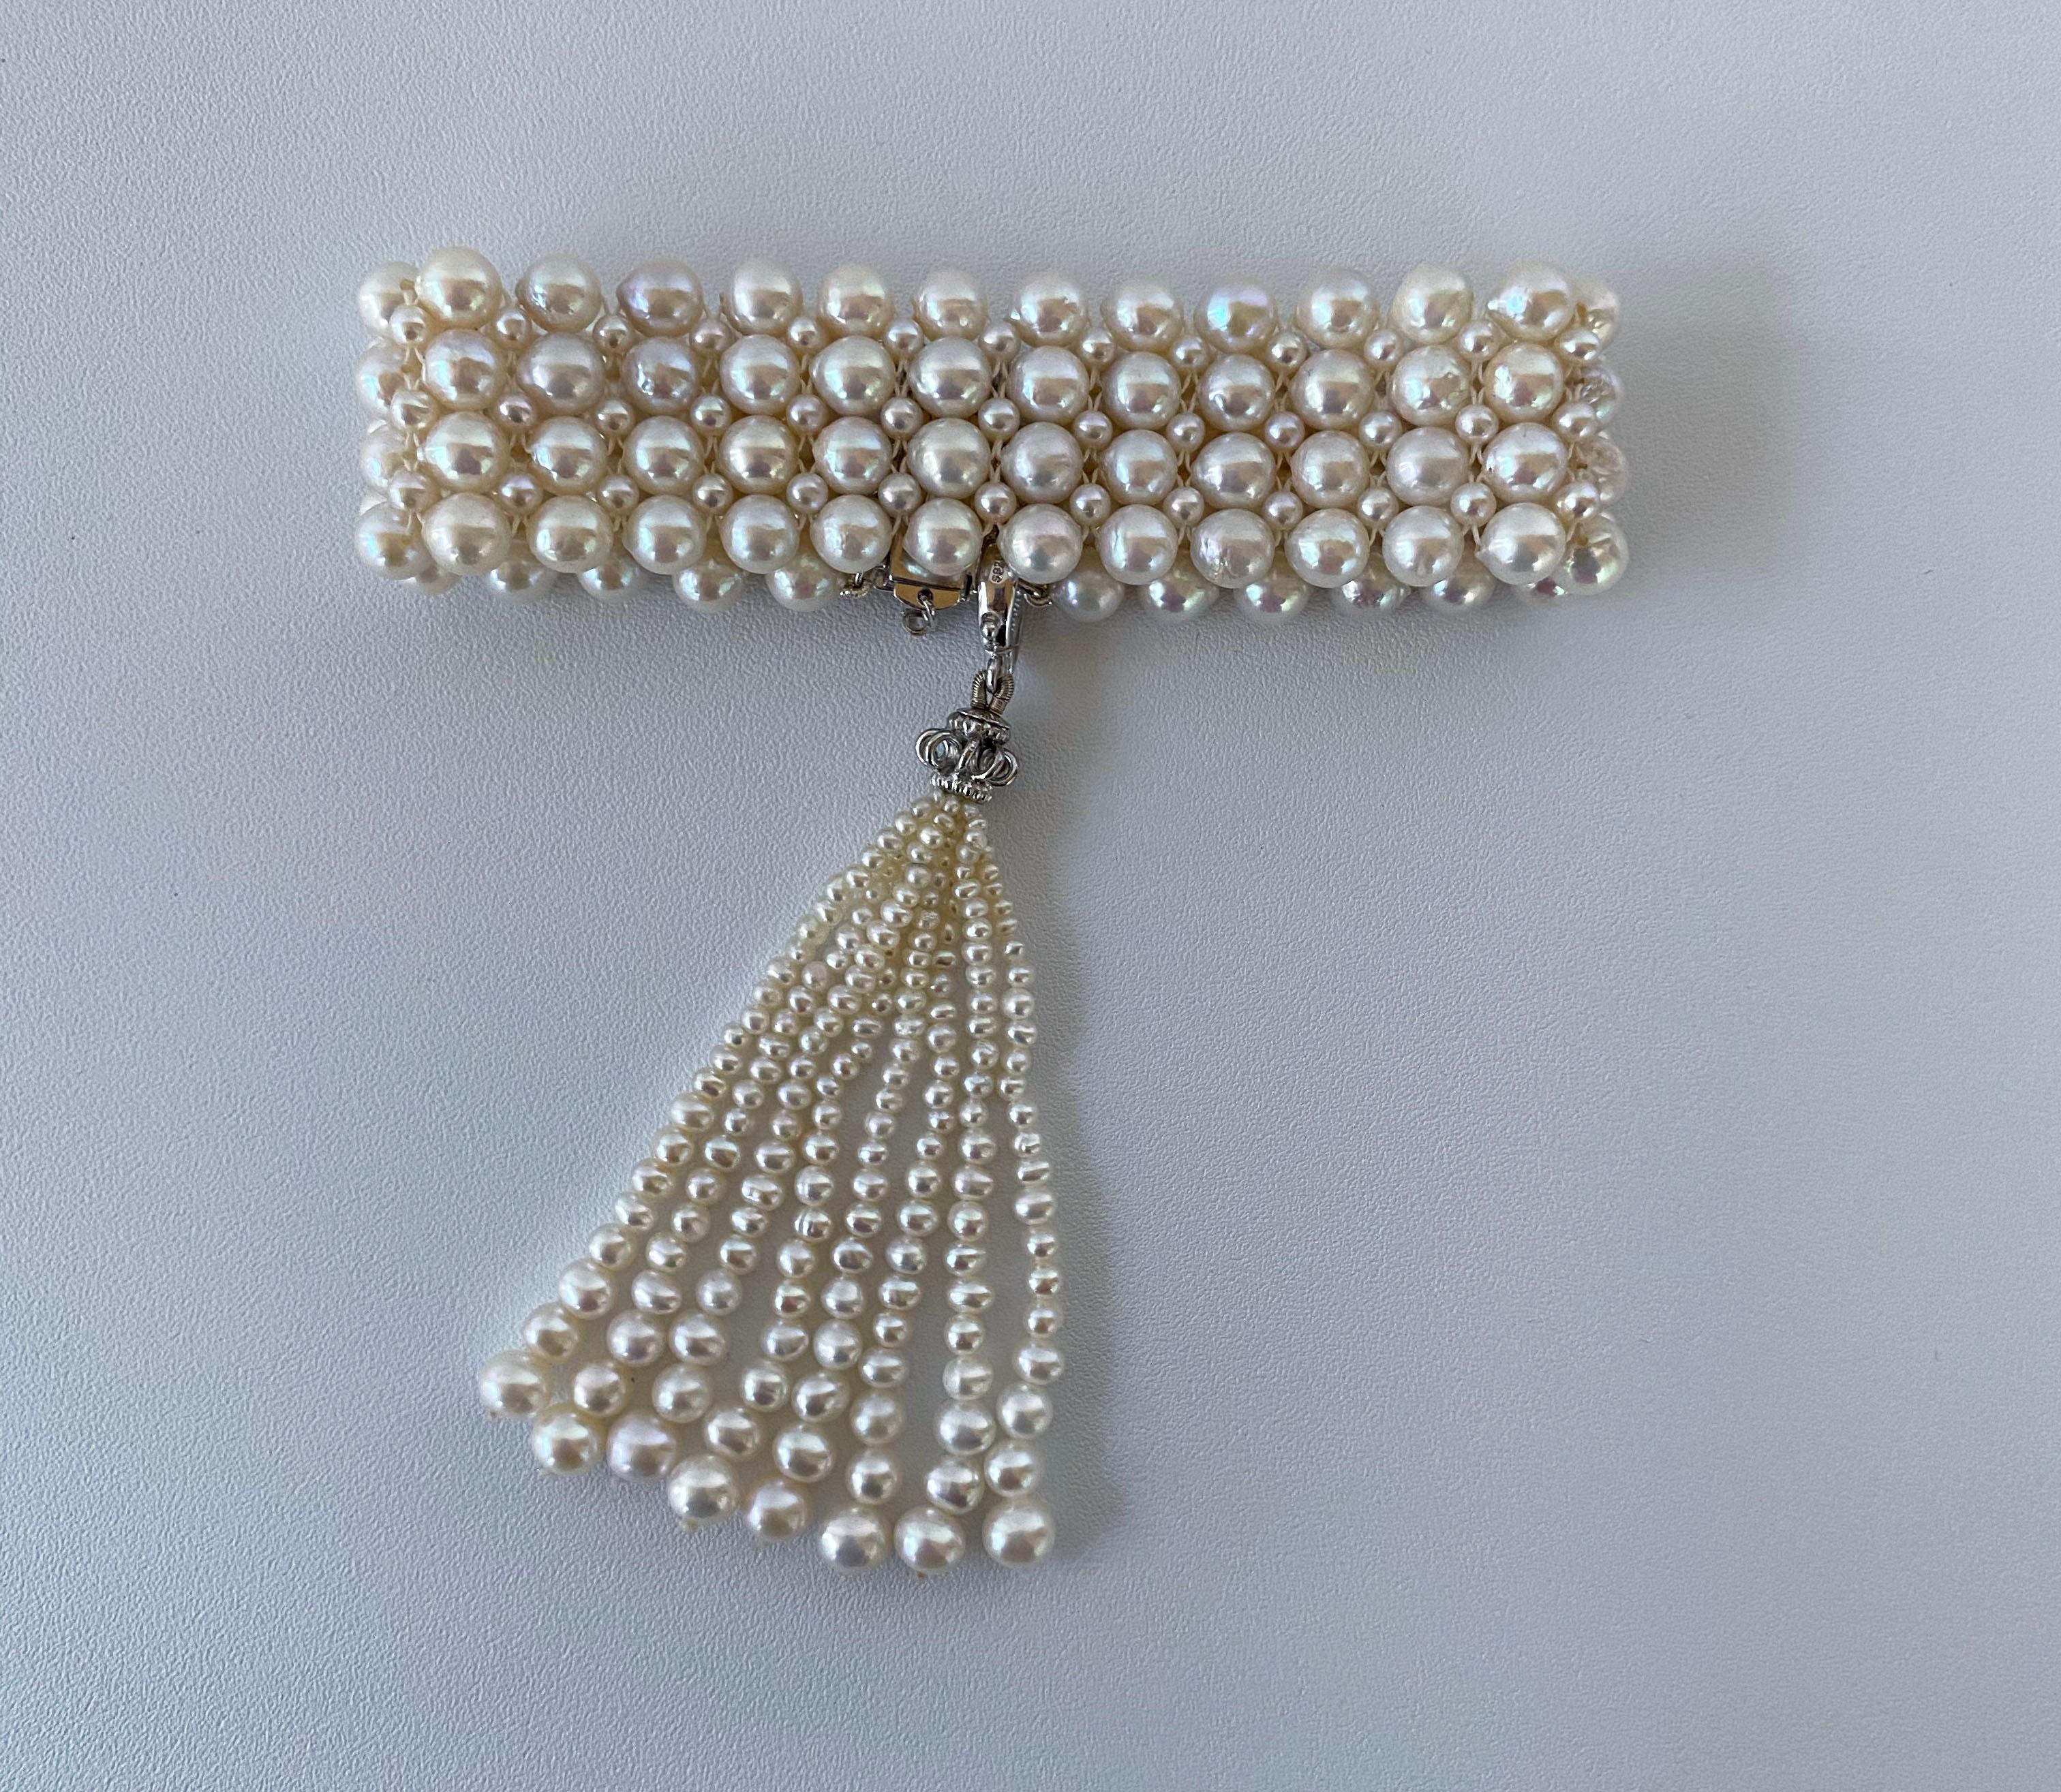 This roaring 1920s' inspired Art Deco bracelet features intricately woven pearls. Art Deco jewelry has been adorned by ladies of the period looking for a little more drama to their look. Elegant hand woven cultured 4.5mm and 2mm pearls meet at a